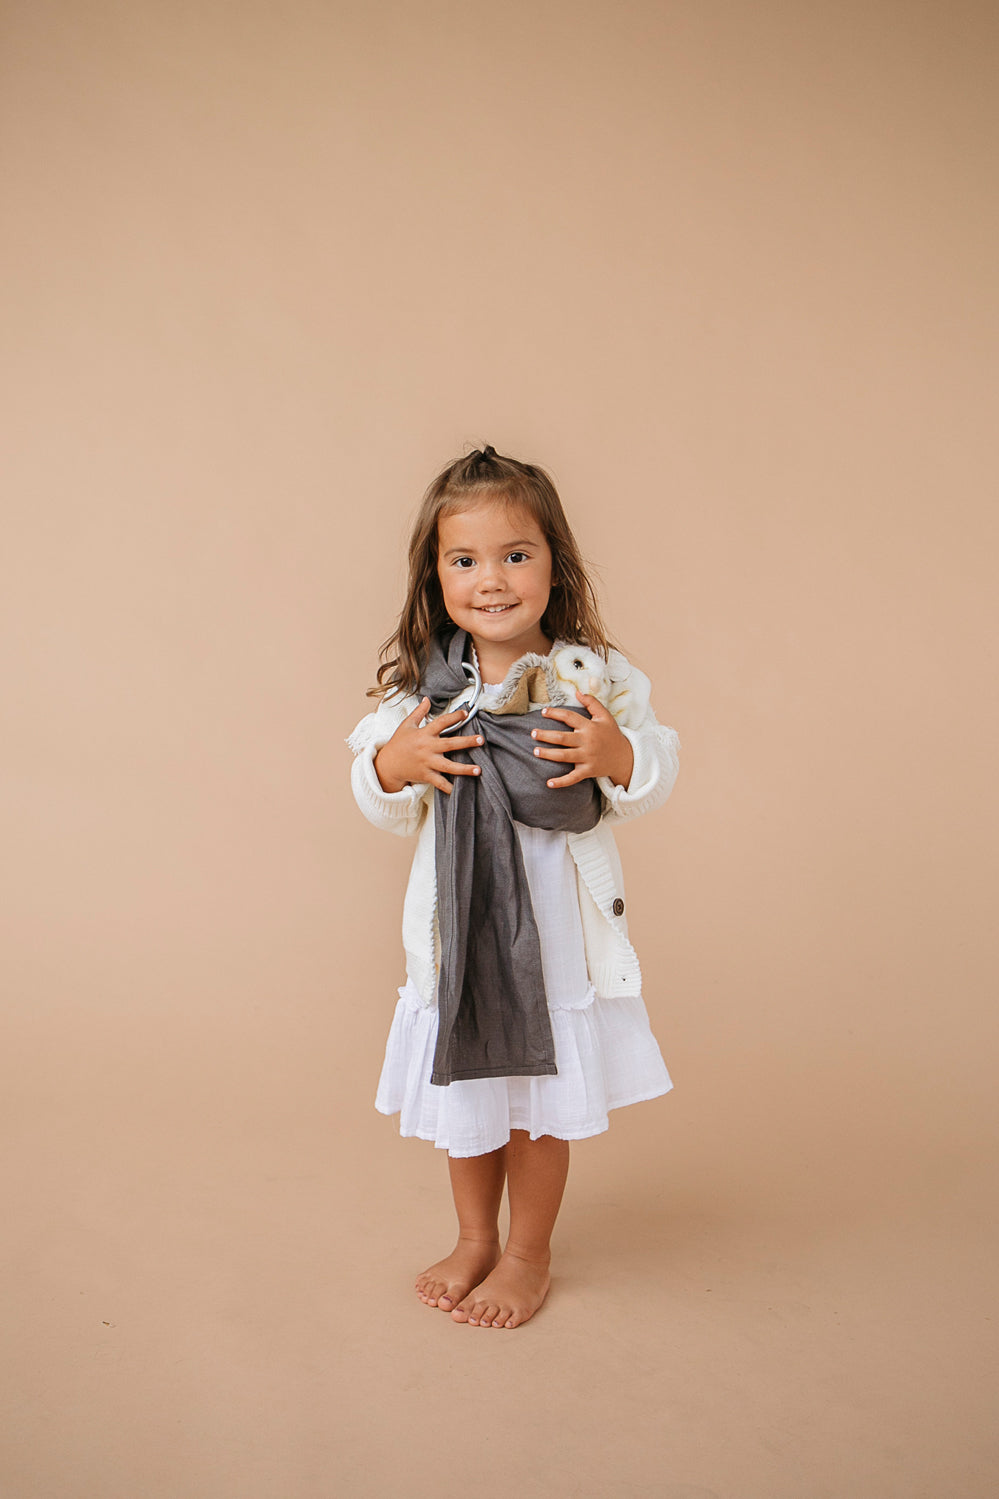 Mini Toy Slings for Your Little ones! – WildBird